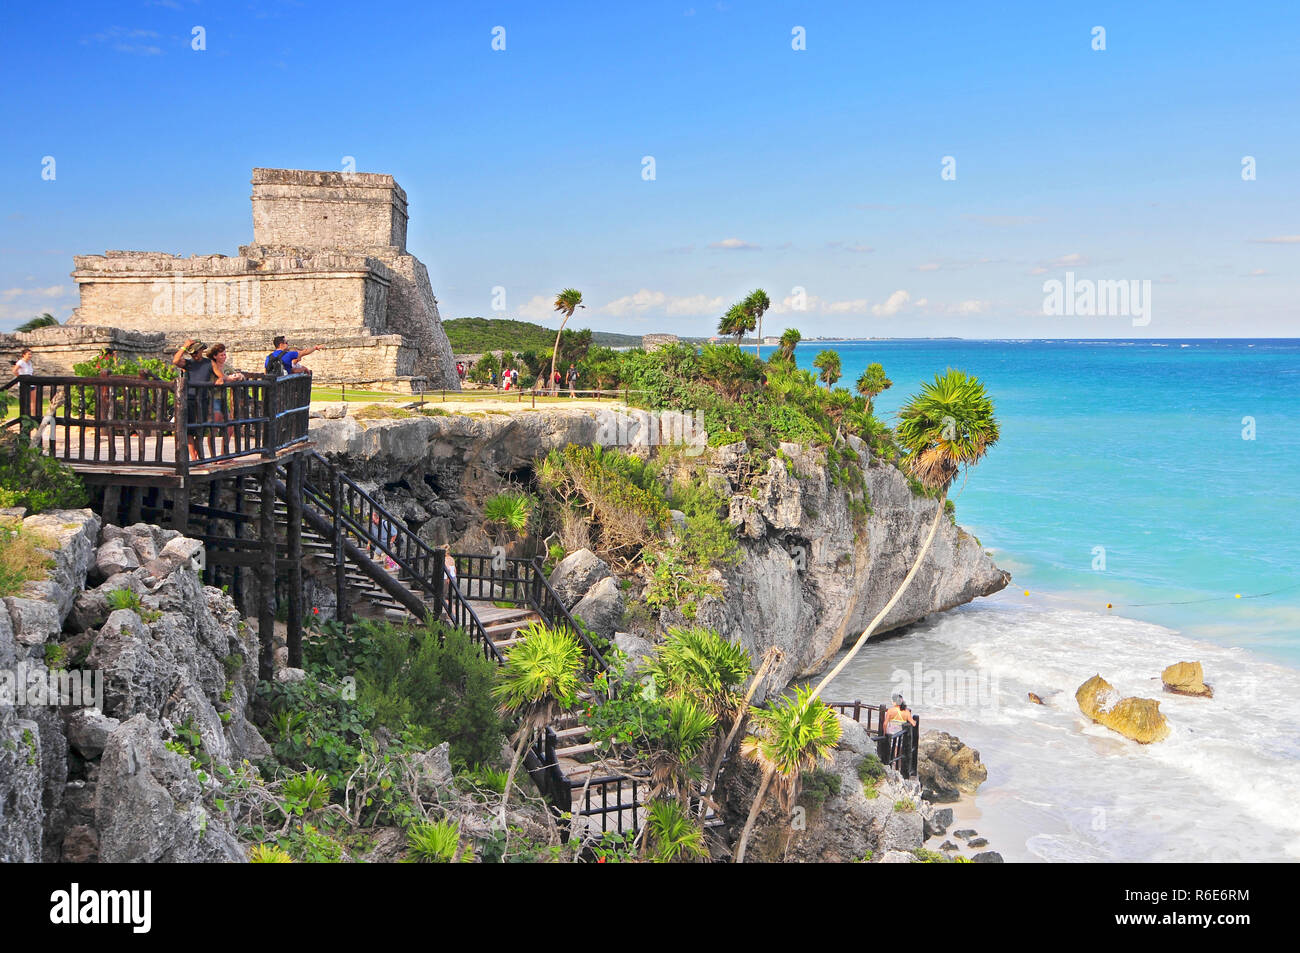 Tulum, The Site Of A Pre-Columbian Mayan Walled City Serving As A Major Port For Coba, In The Mexican State Of Quintana Roo Stock Photo